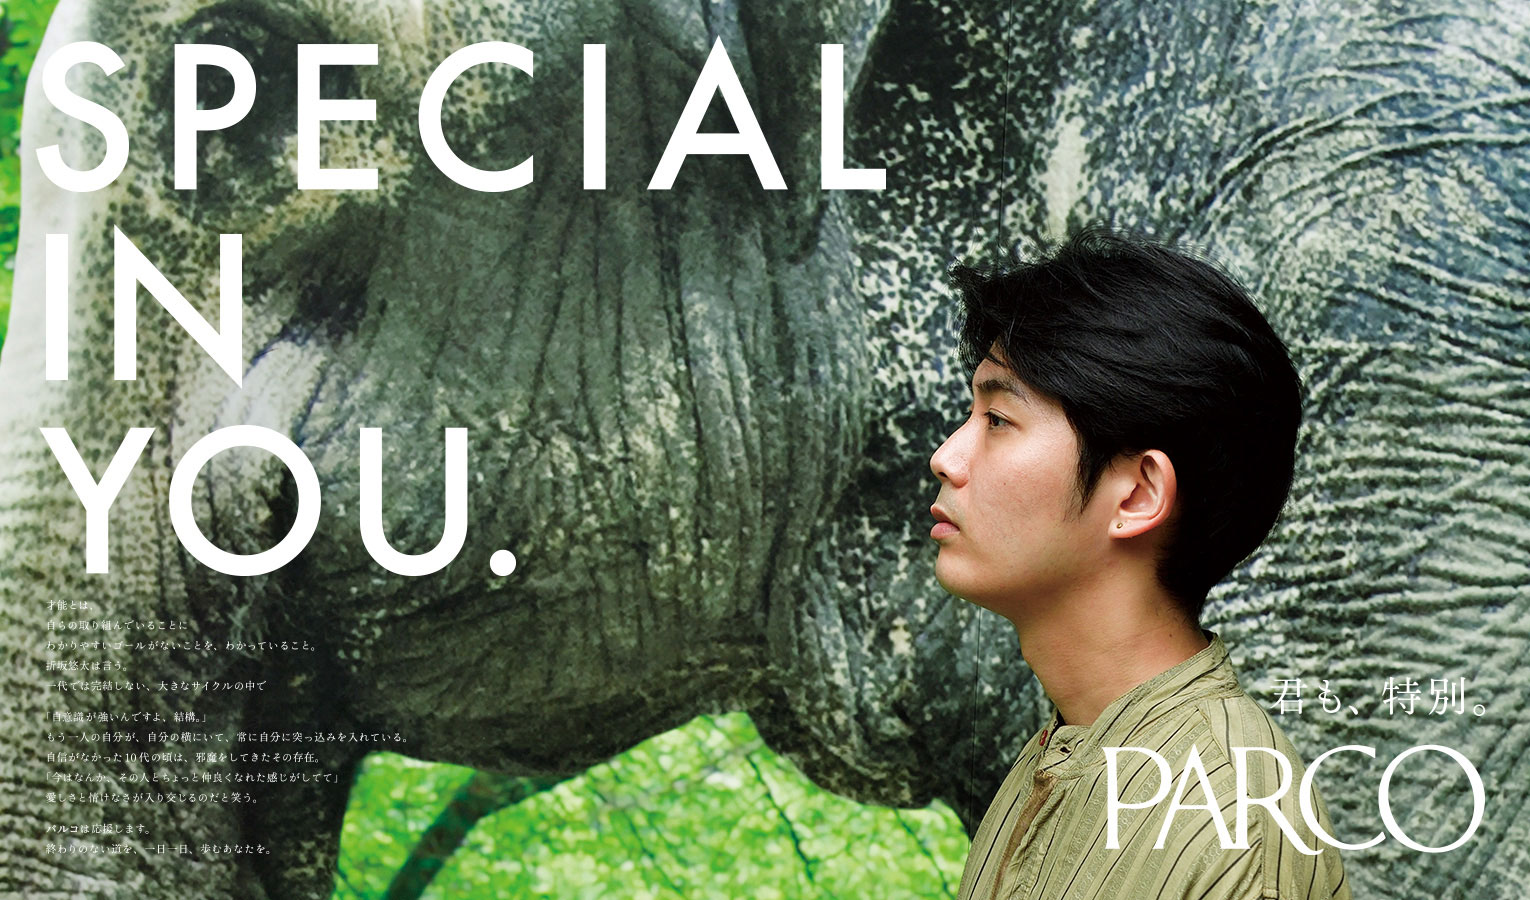 SPECIAL IN YOU.｜株式会社パルコ